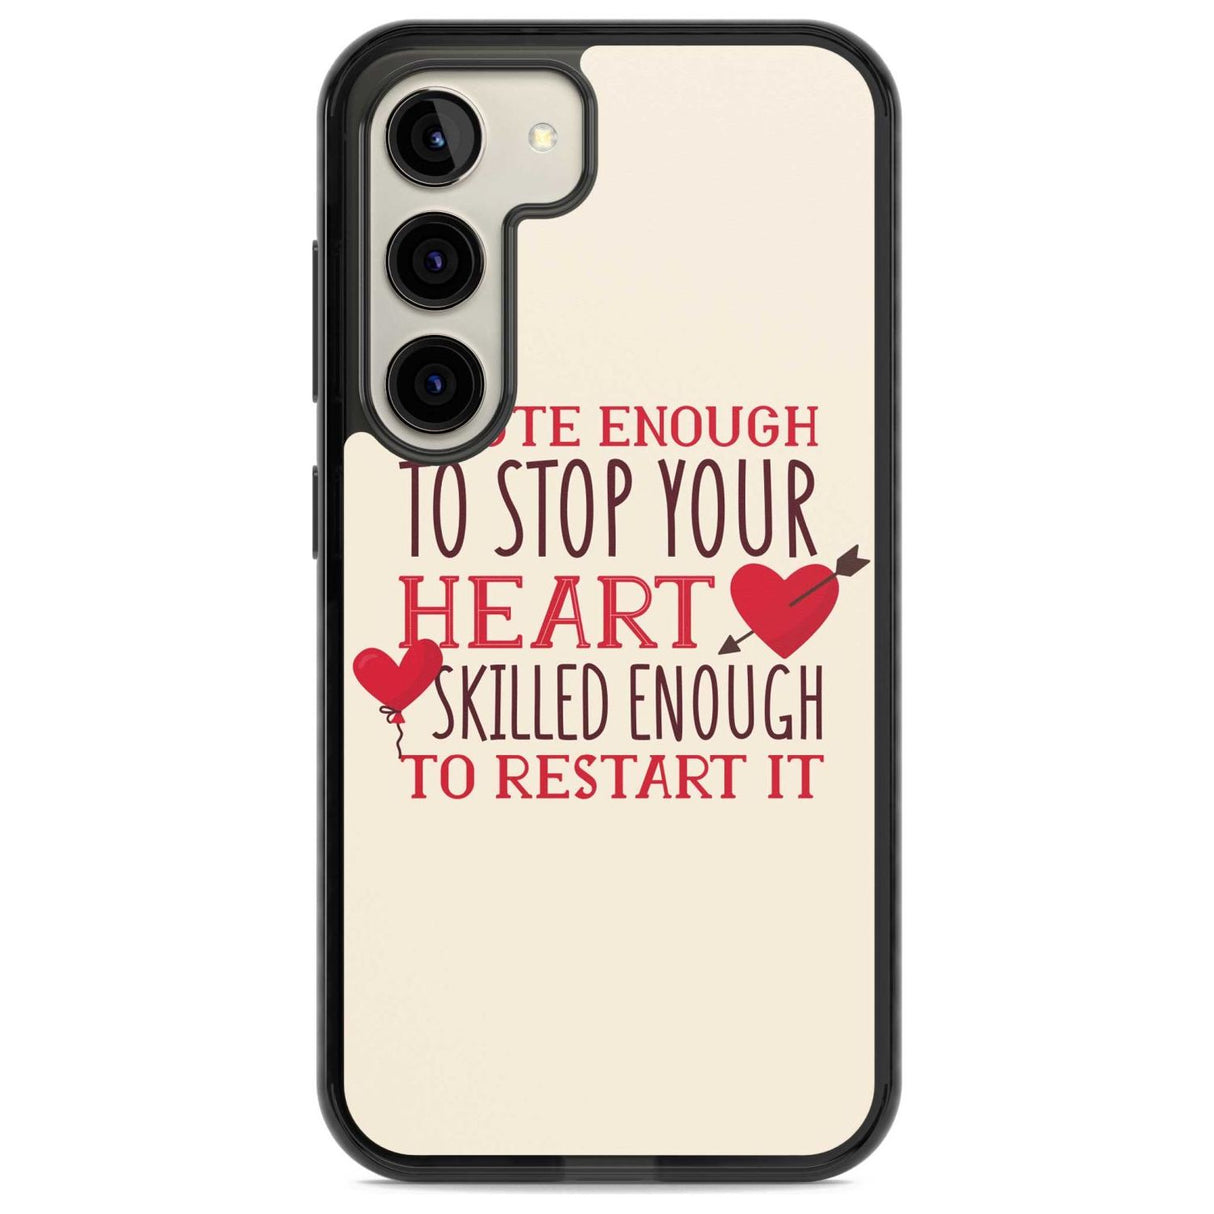 Medical Design Cute Enough to Stop Your Heart Phone Case Samsung S22 / Black Impact Case,Samsung S23 / Black Impact Case Blanc Space